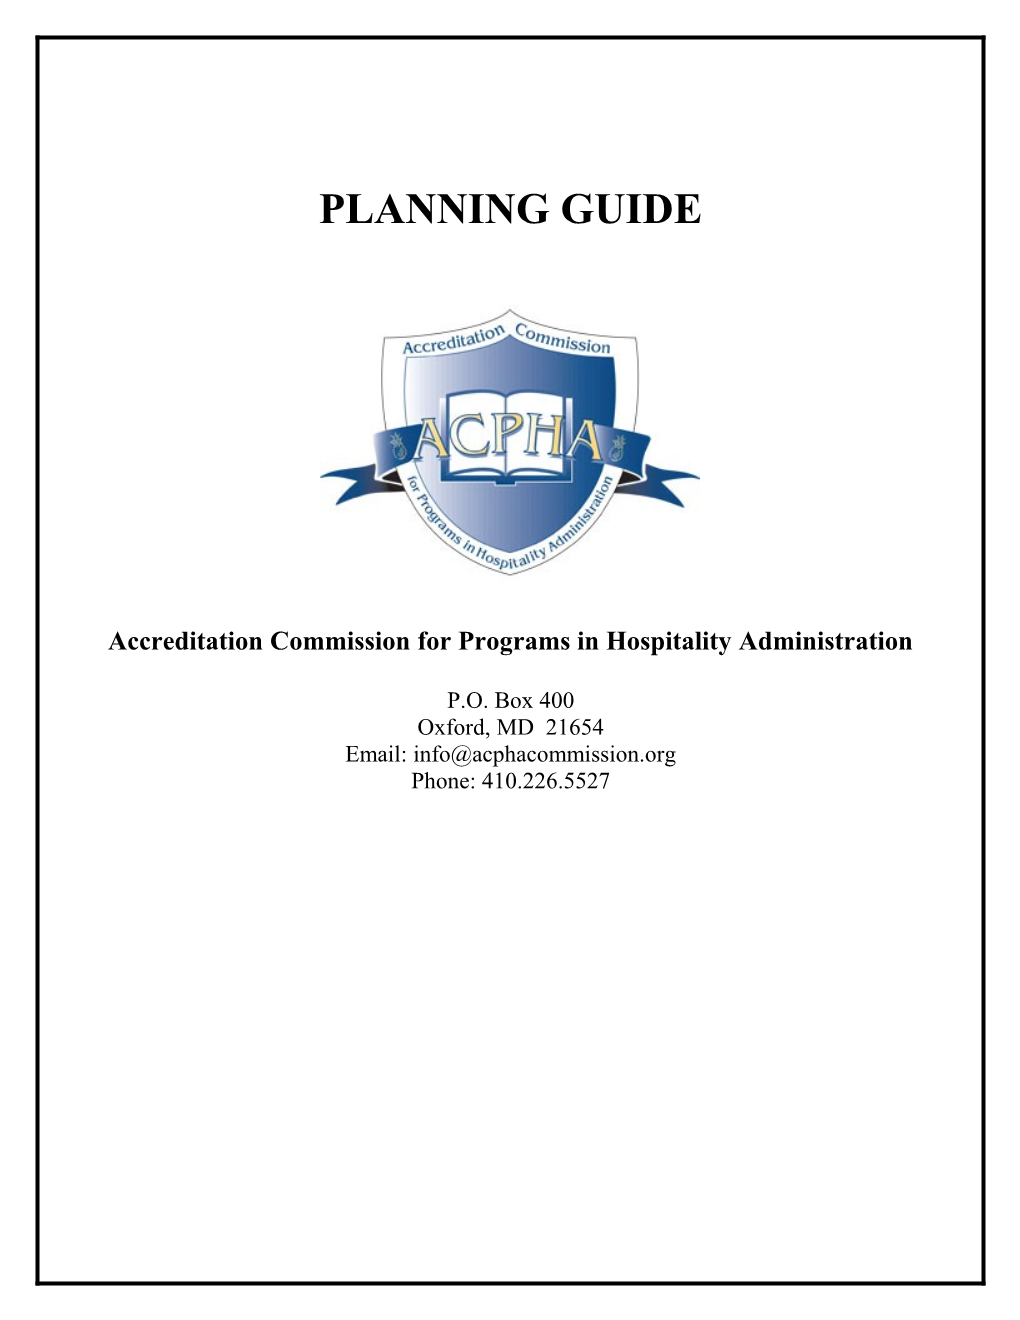 Accreditation Commission for Programs in Hospitalityadministration